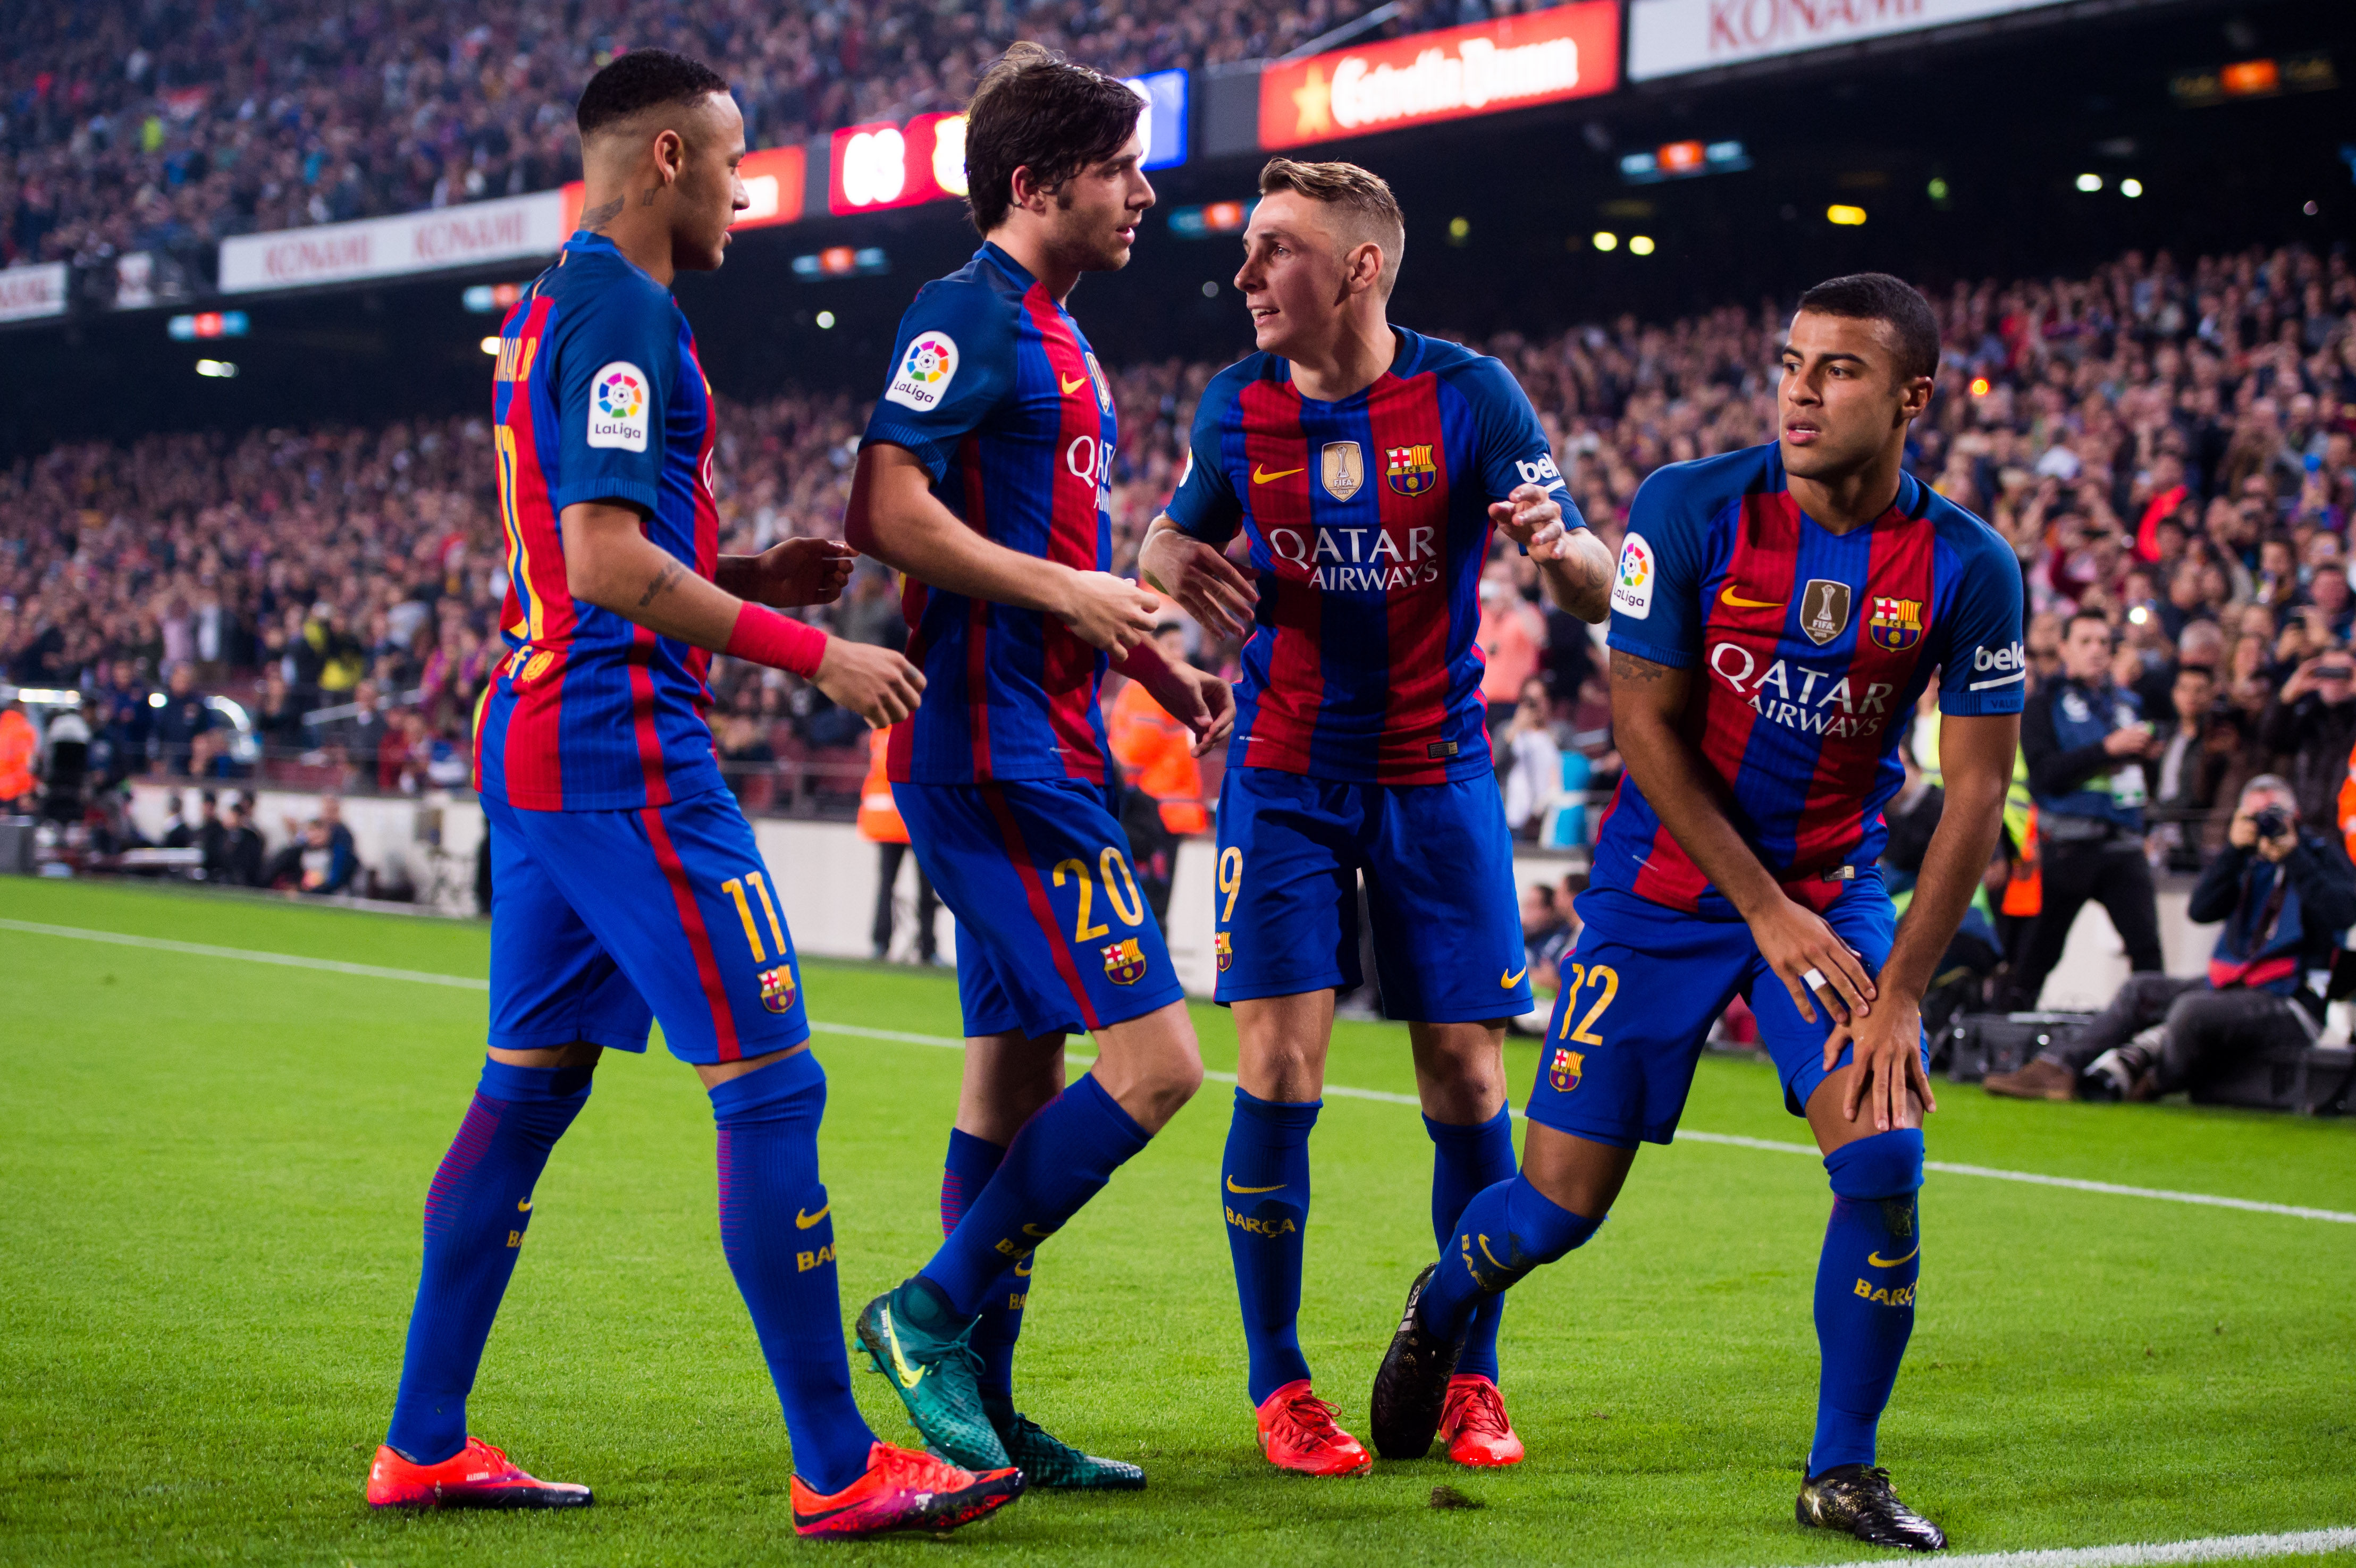 BARCELONA, SPAIN - OCTOBER 29: Rafinha (R) of FC Barcelona celebrates with his teammates Neymar Santos Jr (L), Sergi Roberto (2nd L) and Lucas Digne (2nd R) after scoring the opening goal during the La Liga match between FC Barcelona and Granada CF at Camp Nou stadium on October 29, 2016 in Barcelona, Spain. (Photo by Alex Caparros/Getty Images)